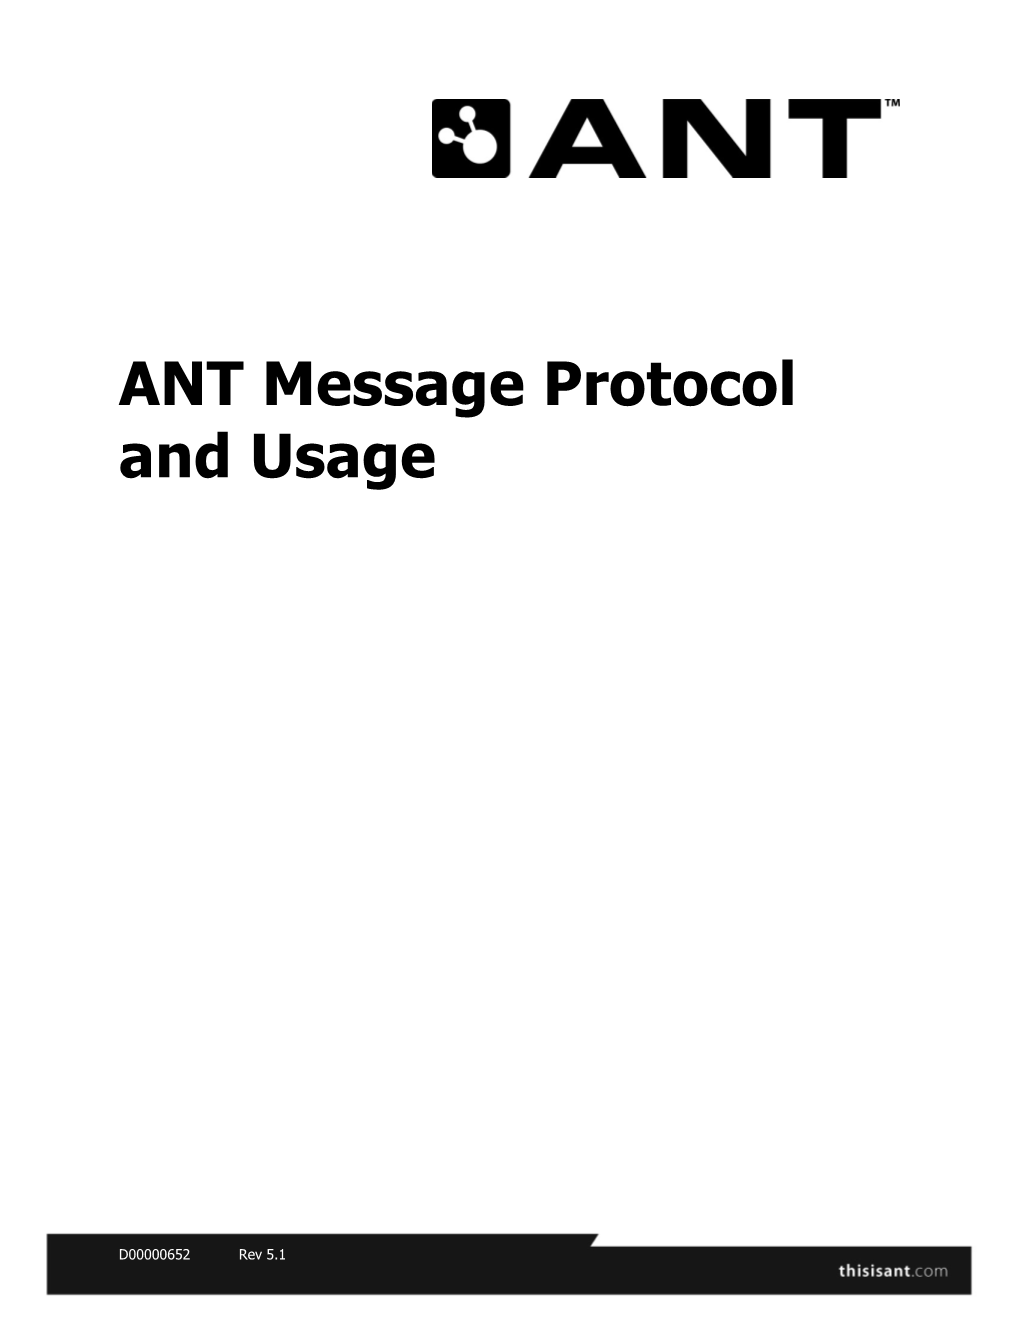 ANT Message Protocol and Usage